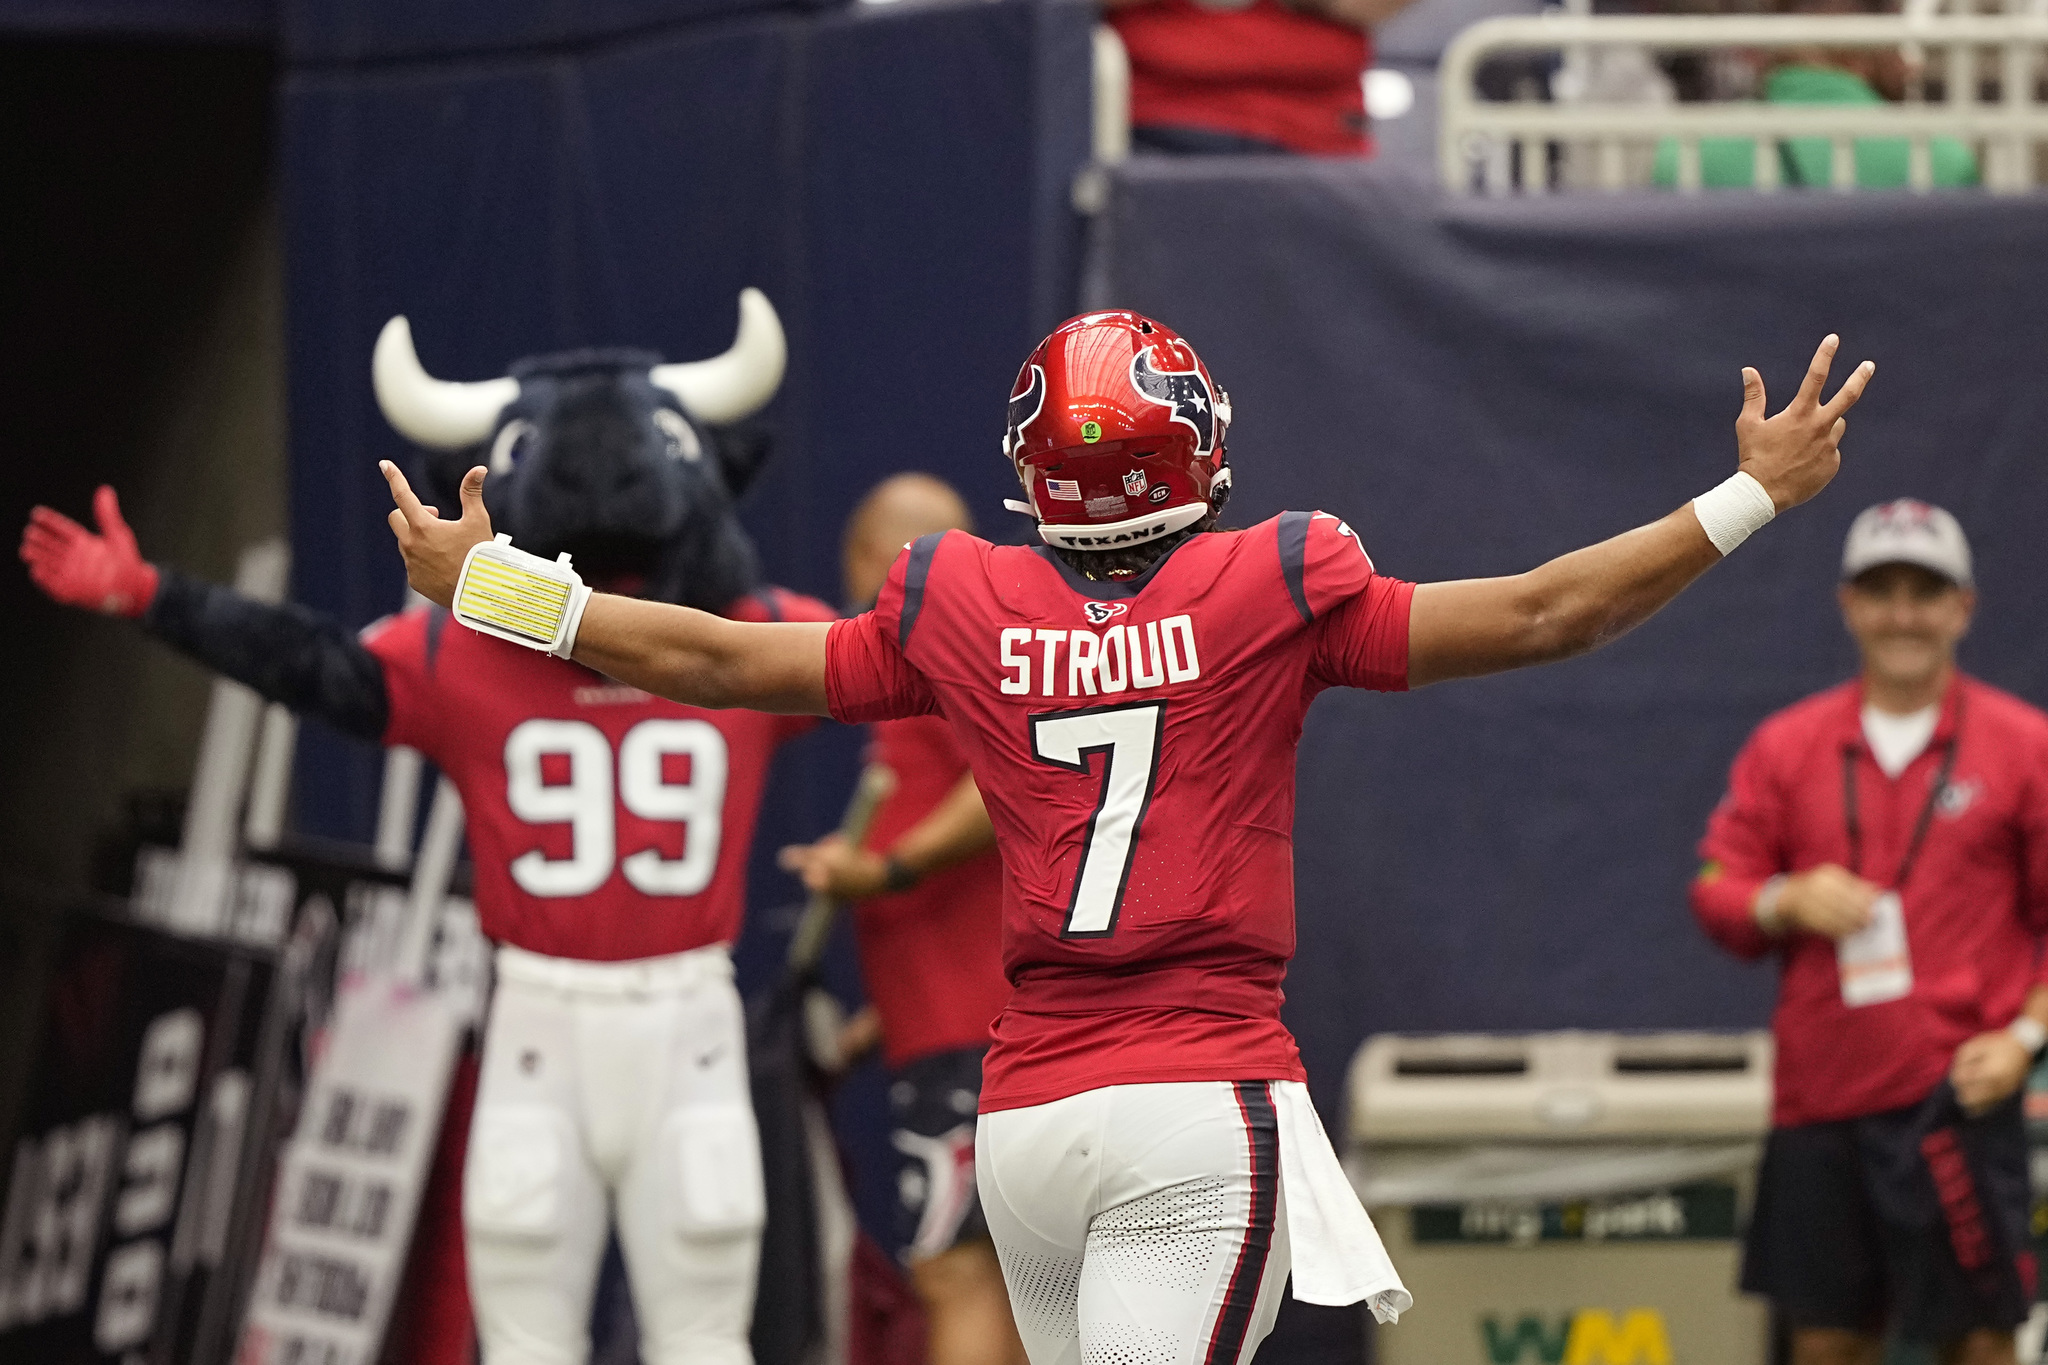 CJ Stroud (QB - Texans) has been, by far, the best rookie QB in the NFL through four weeks.